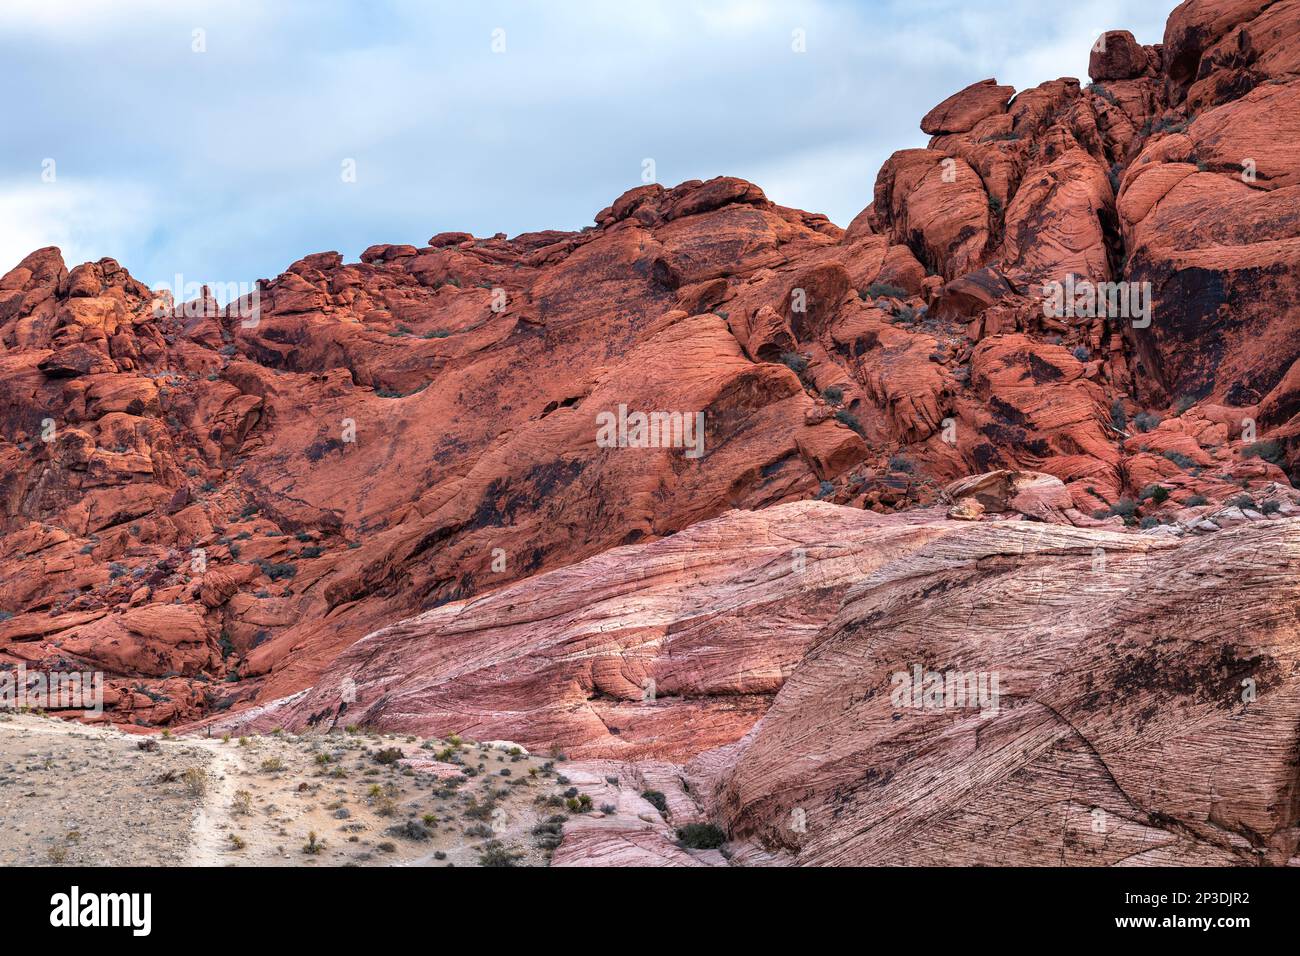 A beautiful, arid, rugged and mountainous scene in the wilderness of Red Rock Canyon in Las Vegas, Nevada, where families go for adventure. Stock Photo